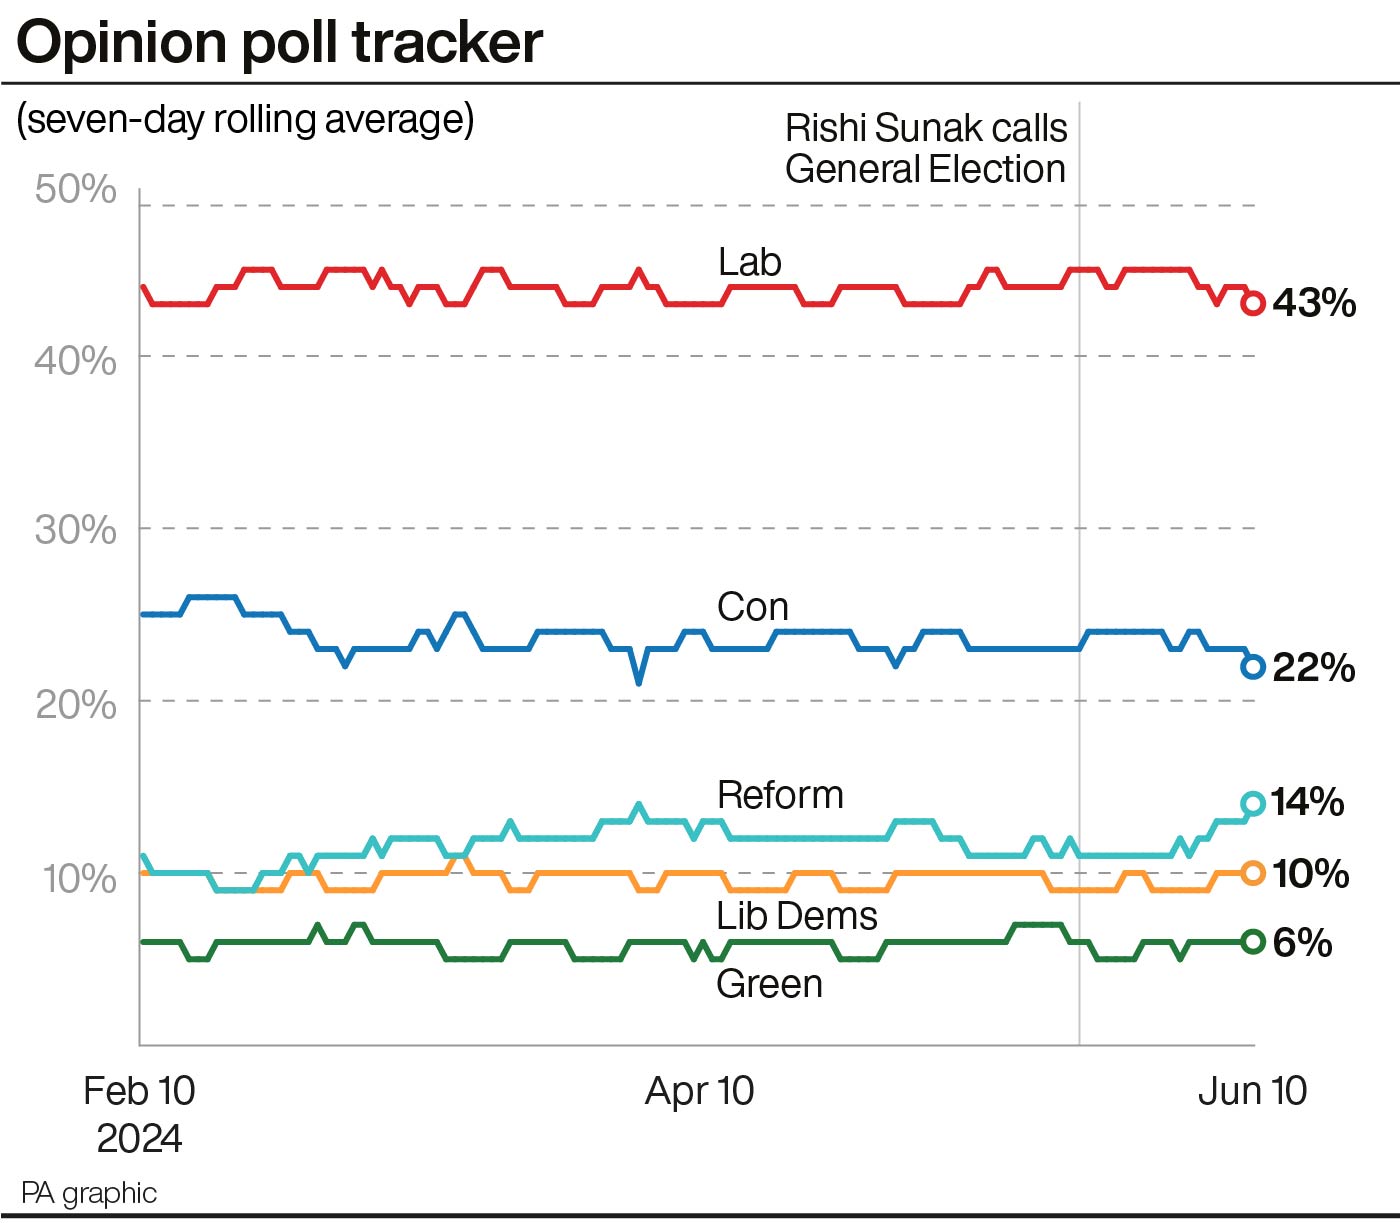 A graph showing the latest opinion poll averages for the main political parties, with Labour currently on 43%, 21 points ahead of the Conservatives on 22%, followed by Reform on 14%, the Lib Dems on 10% and the Greens on 6%